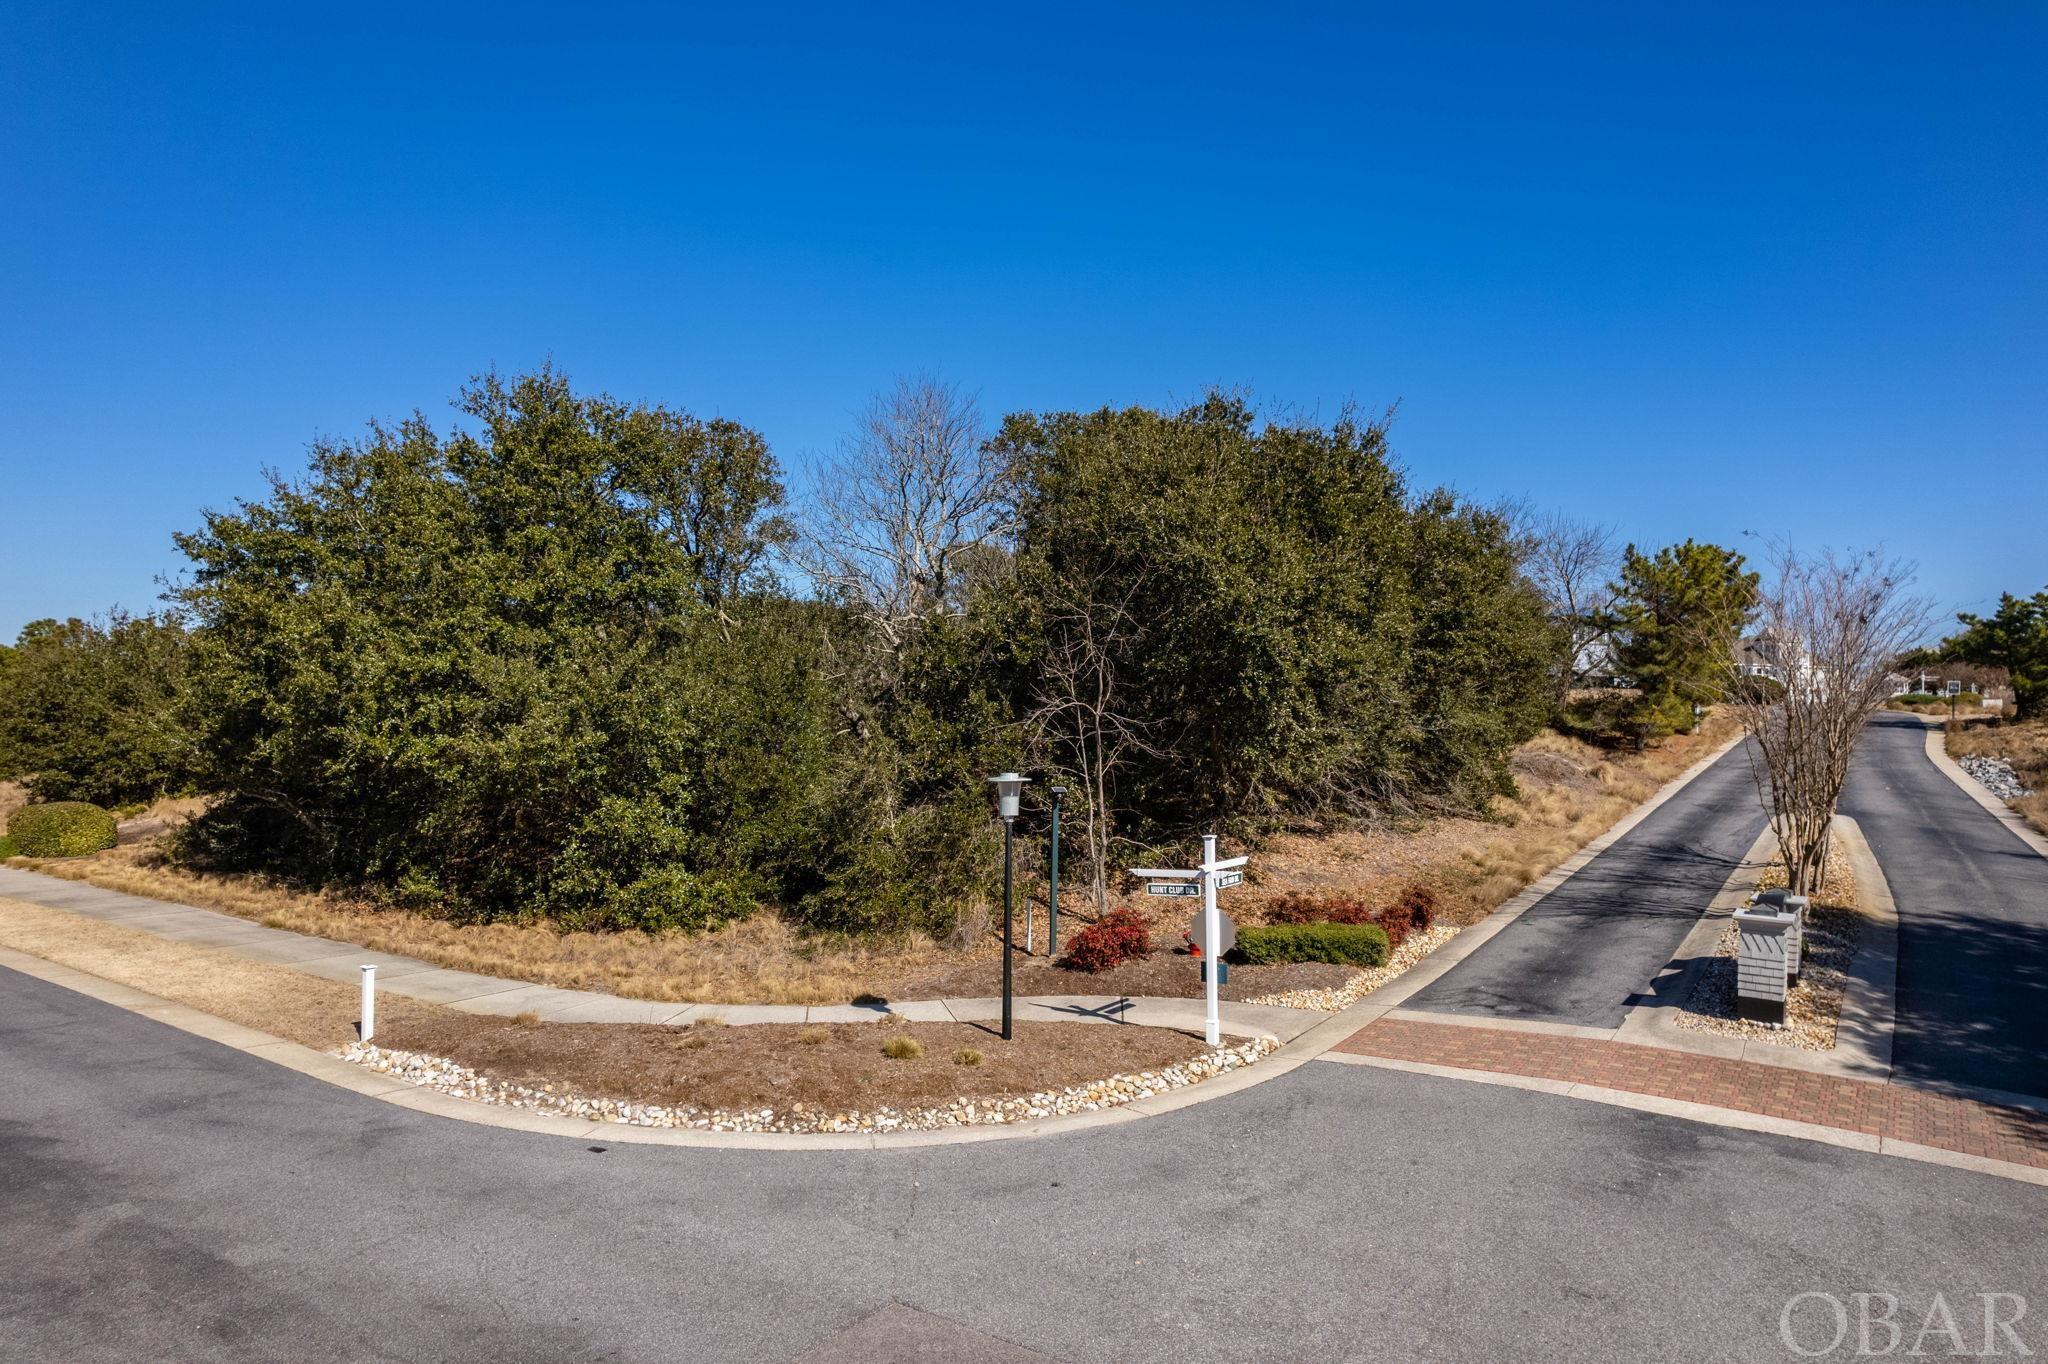 Gorgeous, elevated lot in the resort-style, gated community of The Currituck Club.  Enjoy possible sound views to the west and pristine golf course views to the east and south. Imagine your own brand new custom-built home on this X-flood zone corner lot in one of the most desirable neighborhoods on the OBX. Not only does TCC offer an abundance of amenities including multiple pools, tennis courts, in-season trolley service and more, the local attractions, restaurants, and shopping of Corolla are close-by.  Build your dream home now!